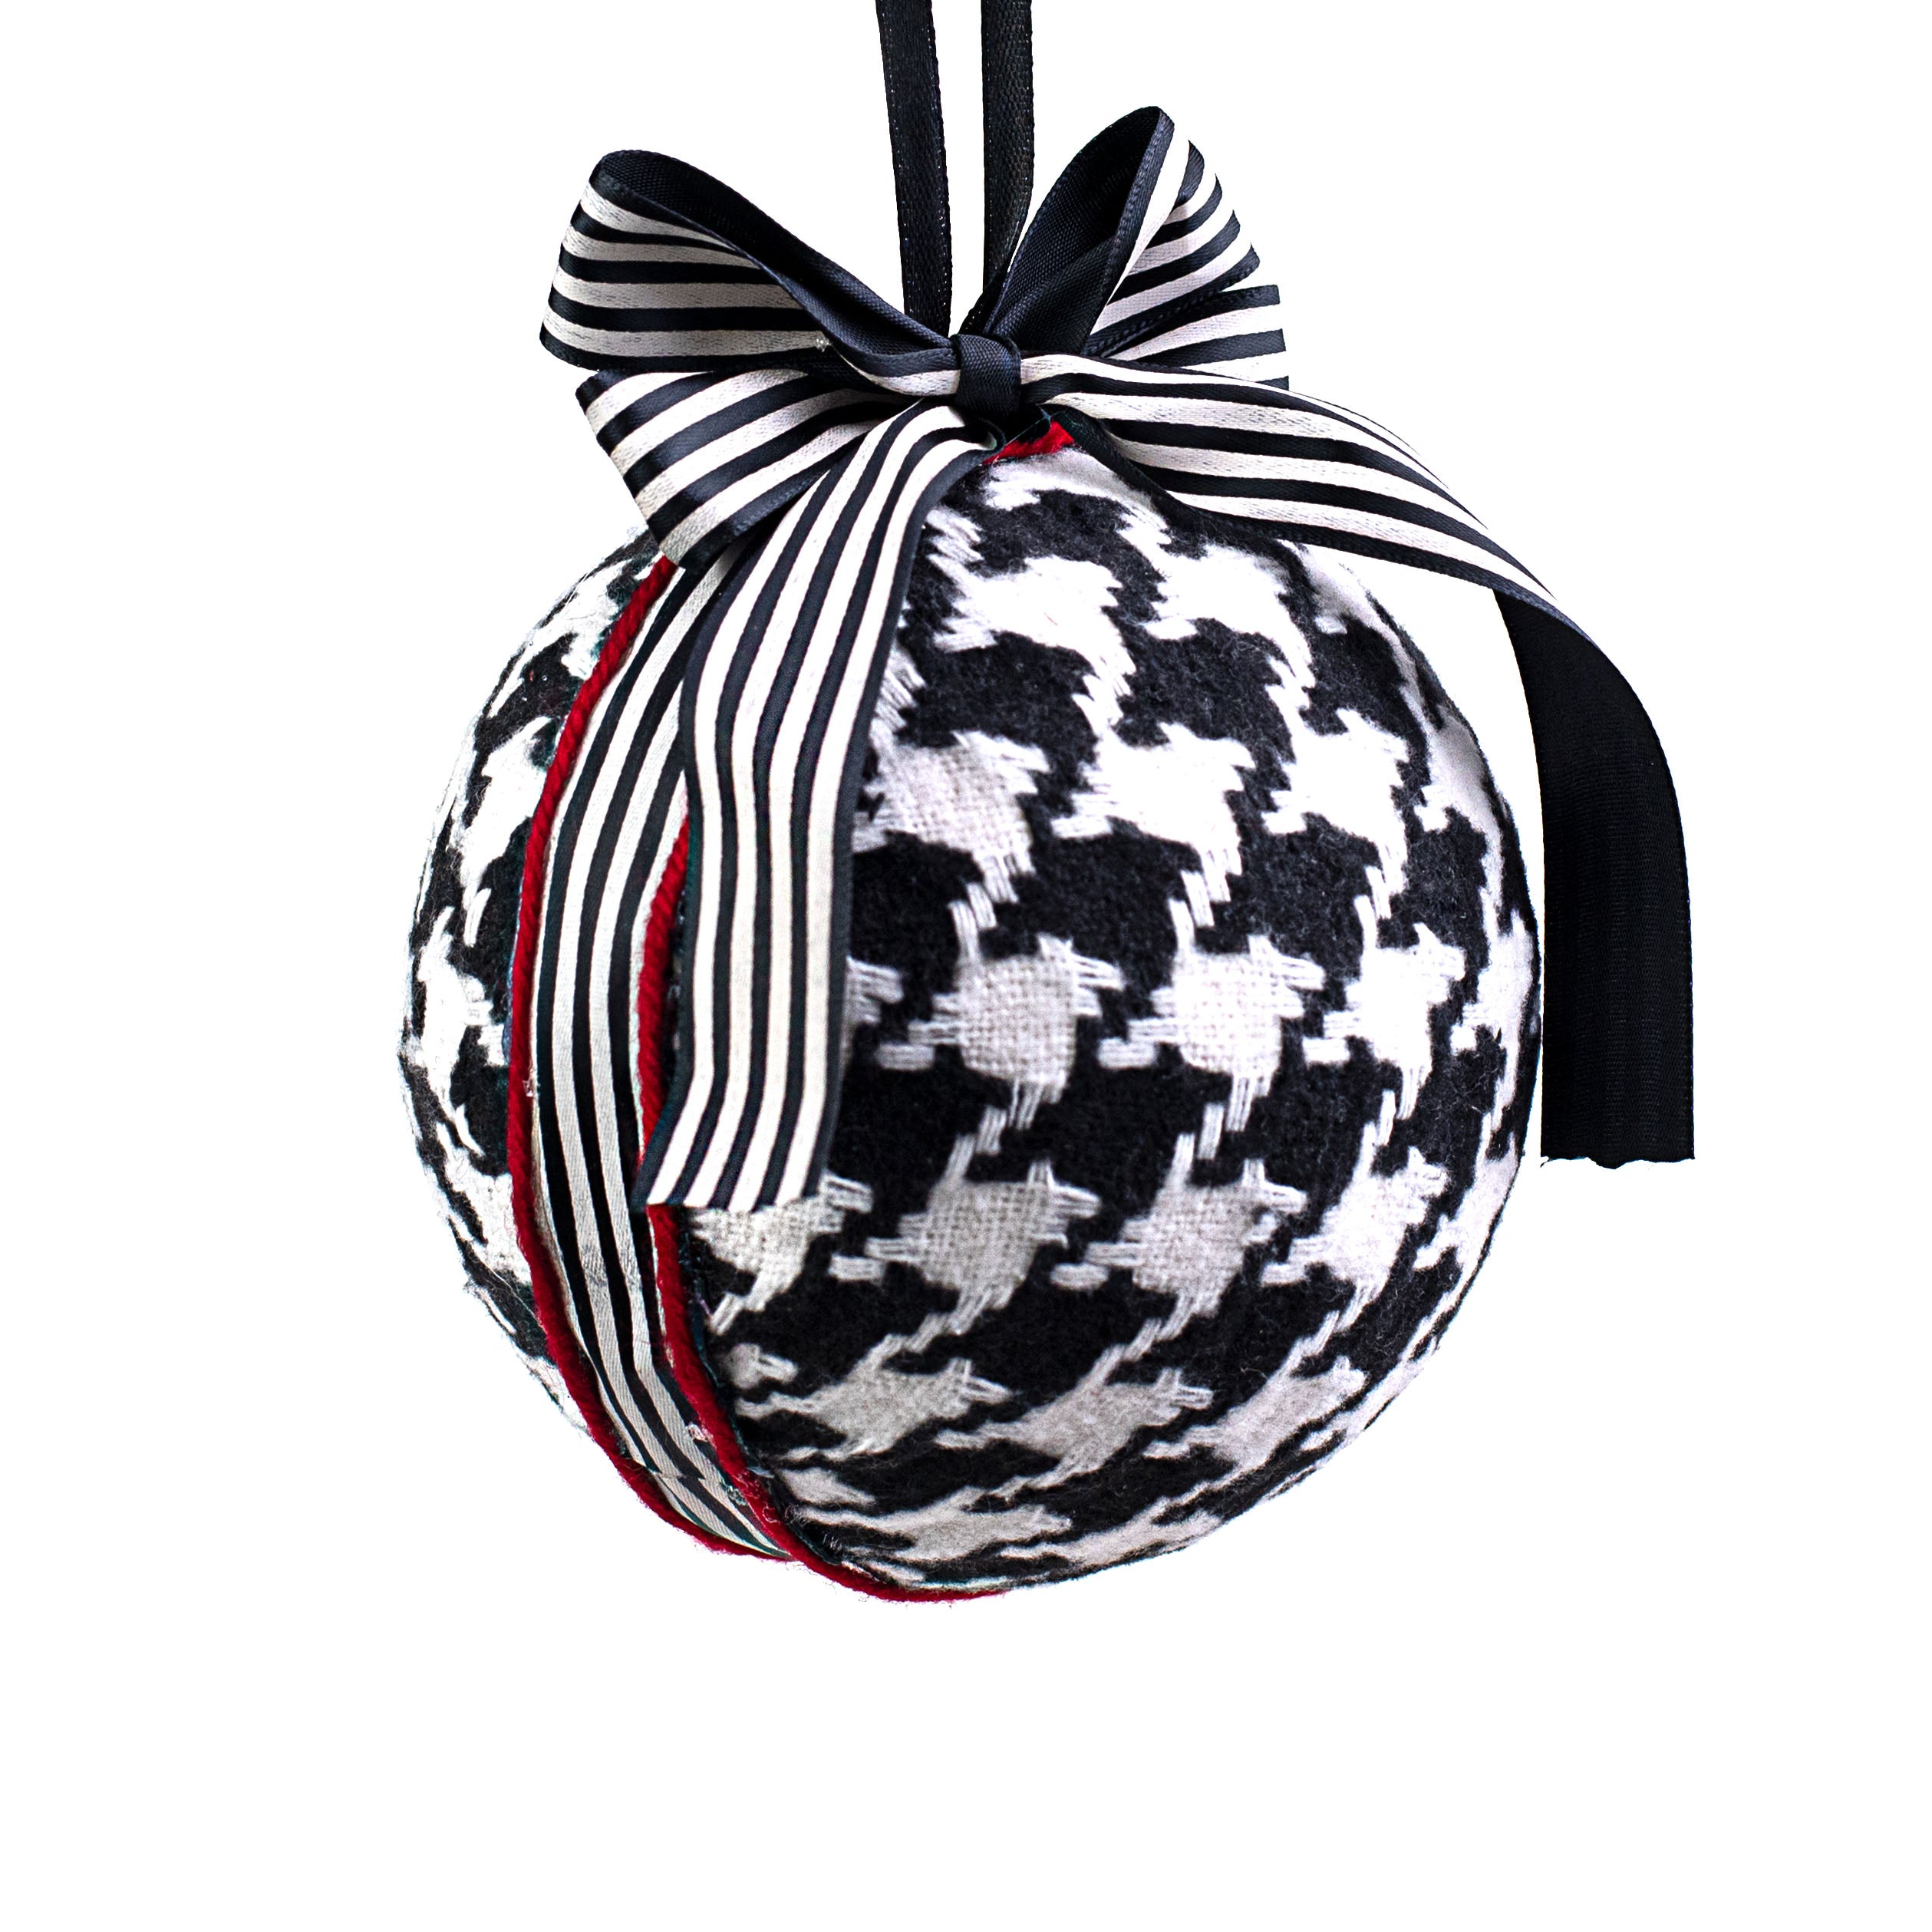 5" Houndstooth Ball Ornament